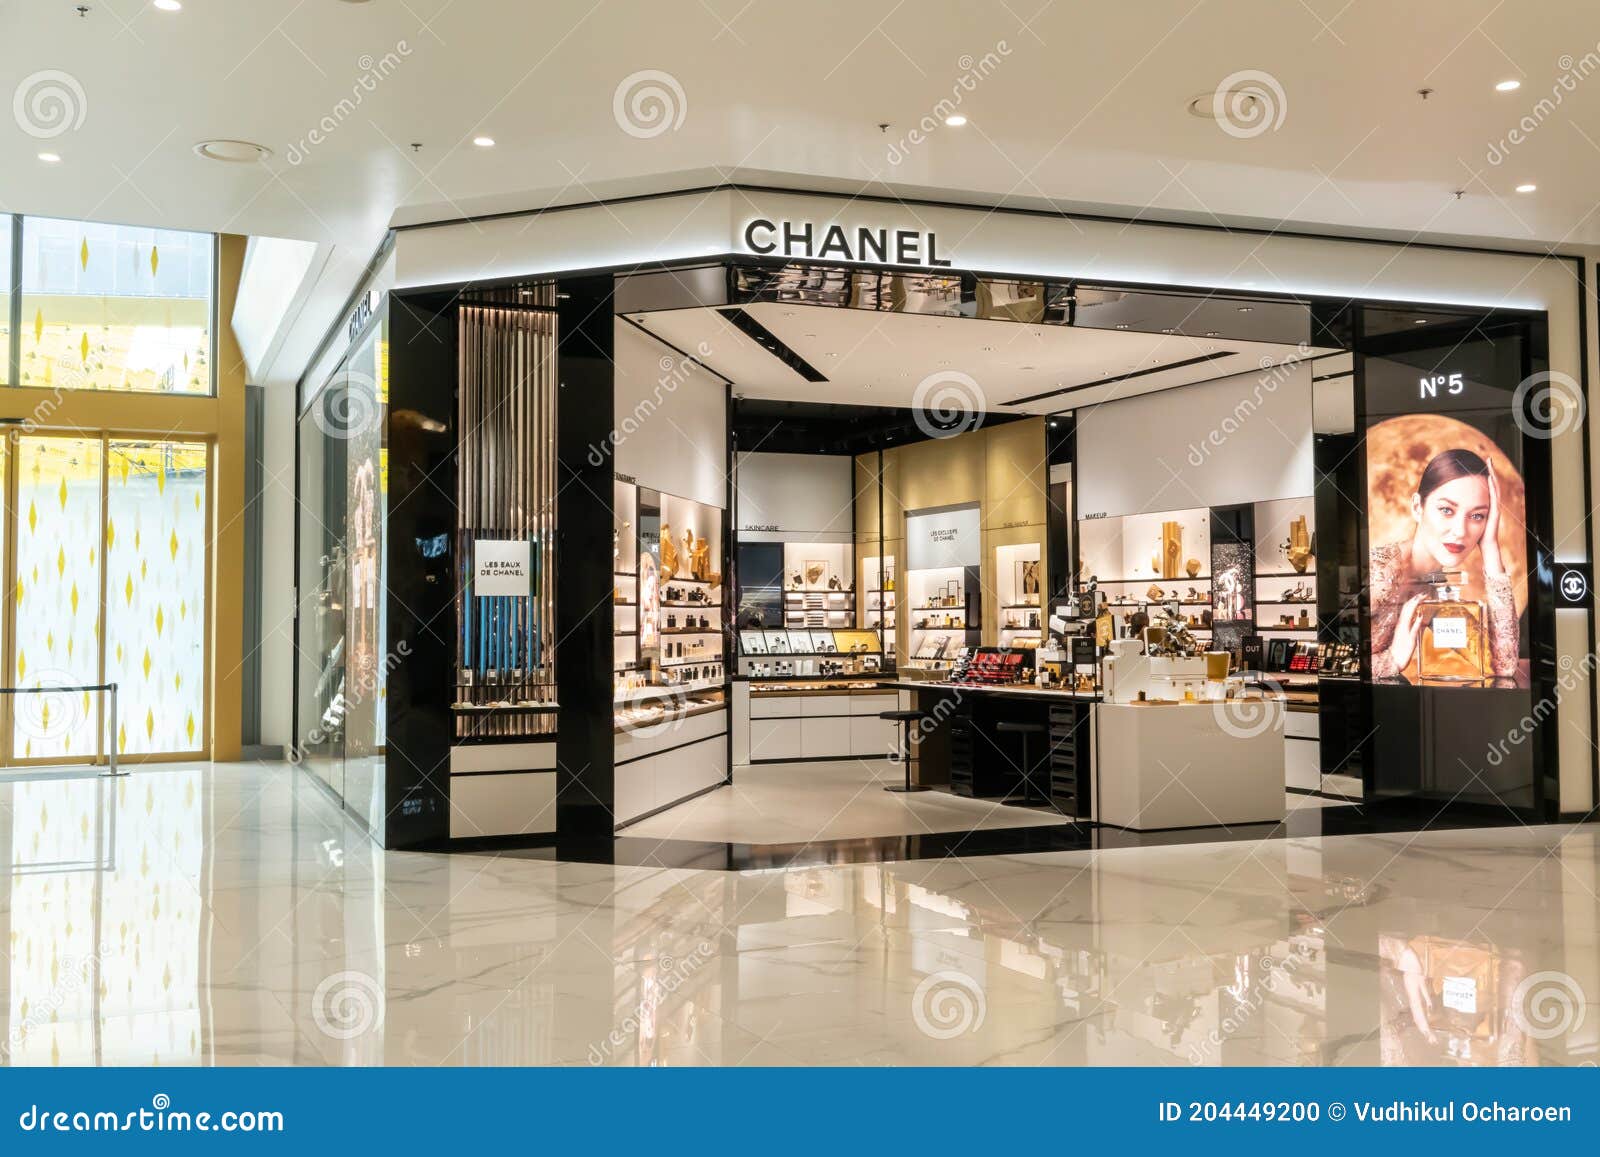 120+ Chanel Display Stock Photos, Pictures & Royalty-Free Images